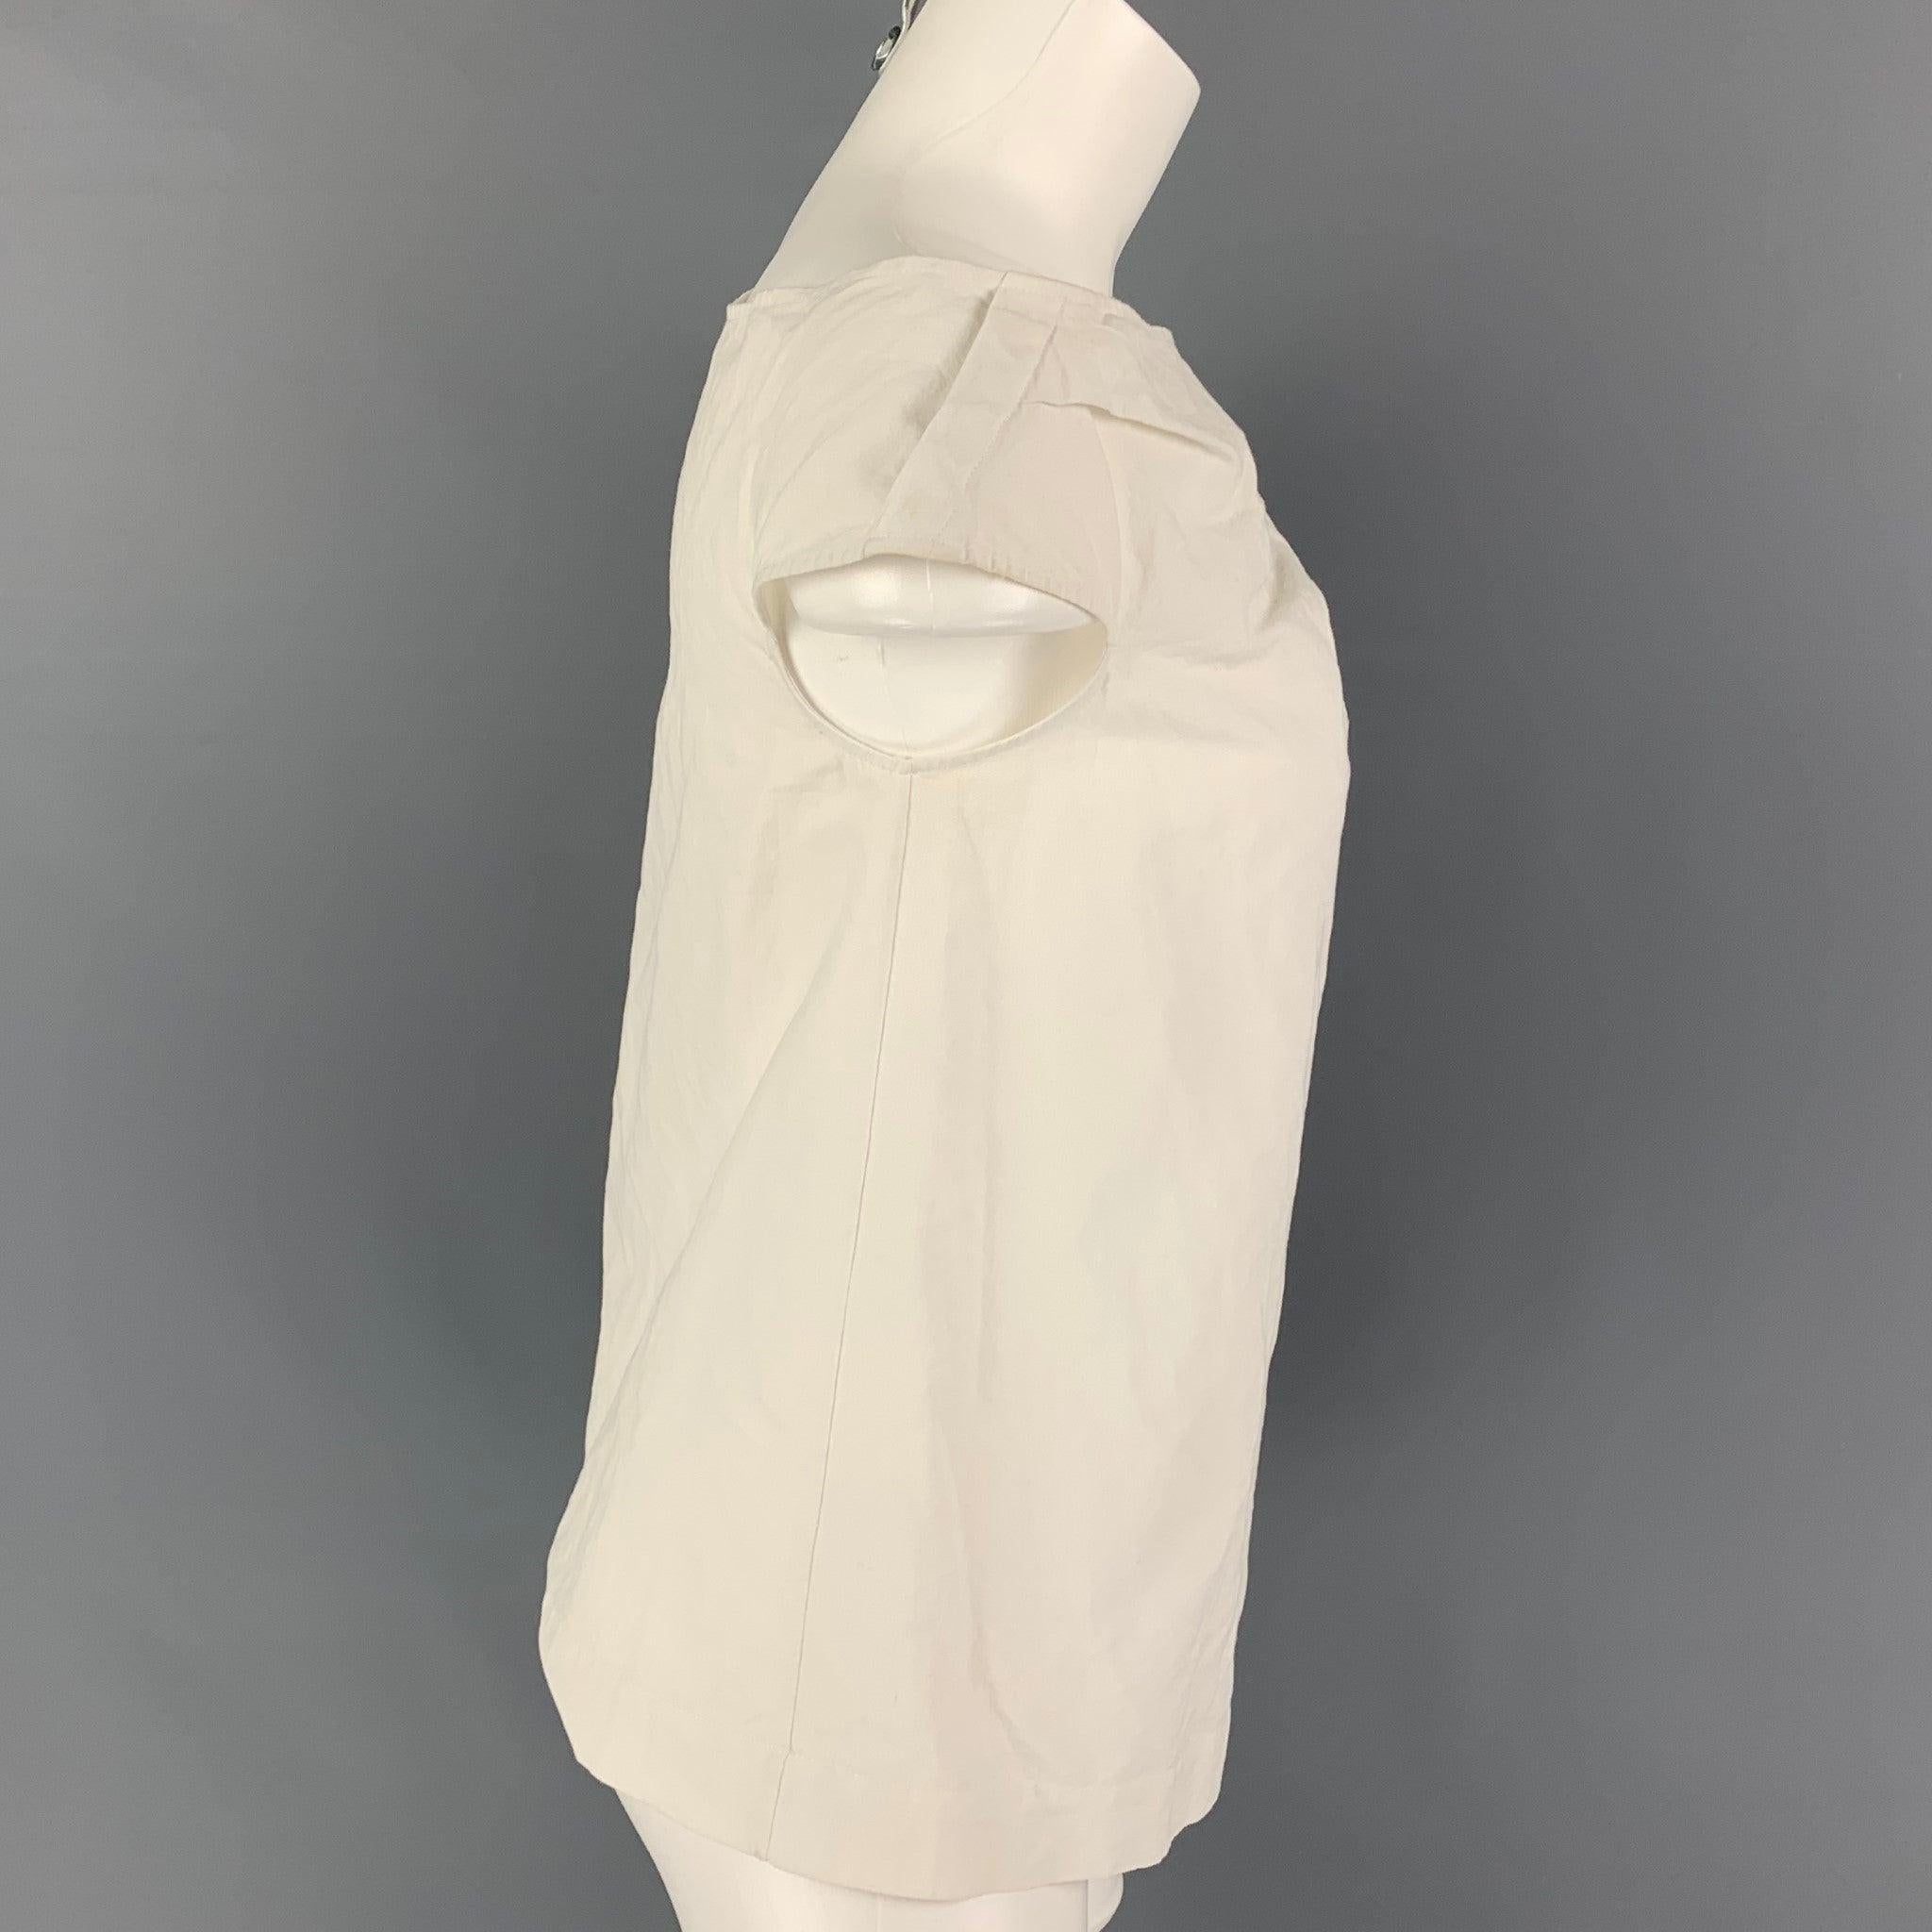 ISA ARFEN blouse comes in a cream wrinkled cotton blend featuring a asymmetrical design, a-line, and a sleeveless style.
Good
Pre-Owned Condition. 

Marked:   6 

Measurements: 
 
Shoulder: 19 inches  Bust: 35 inches  Length: 22 inches 
  
  
